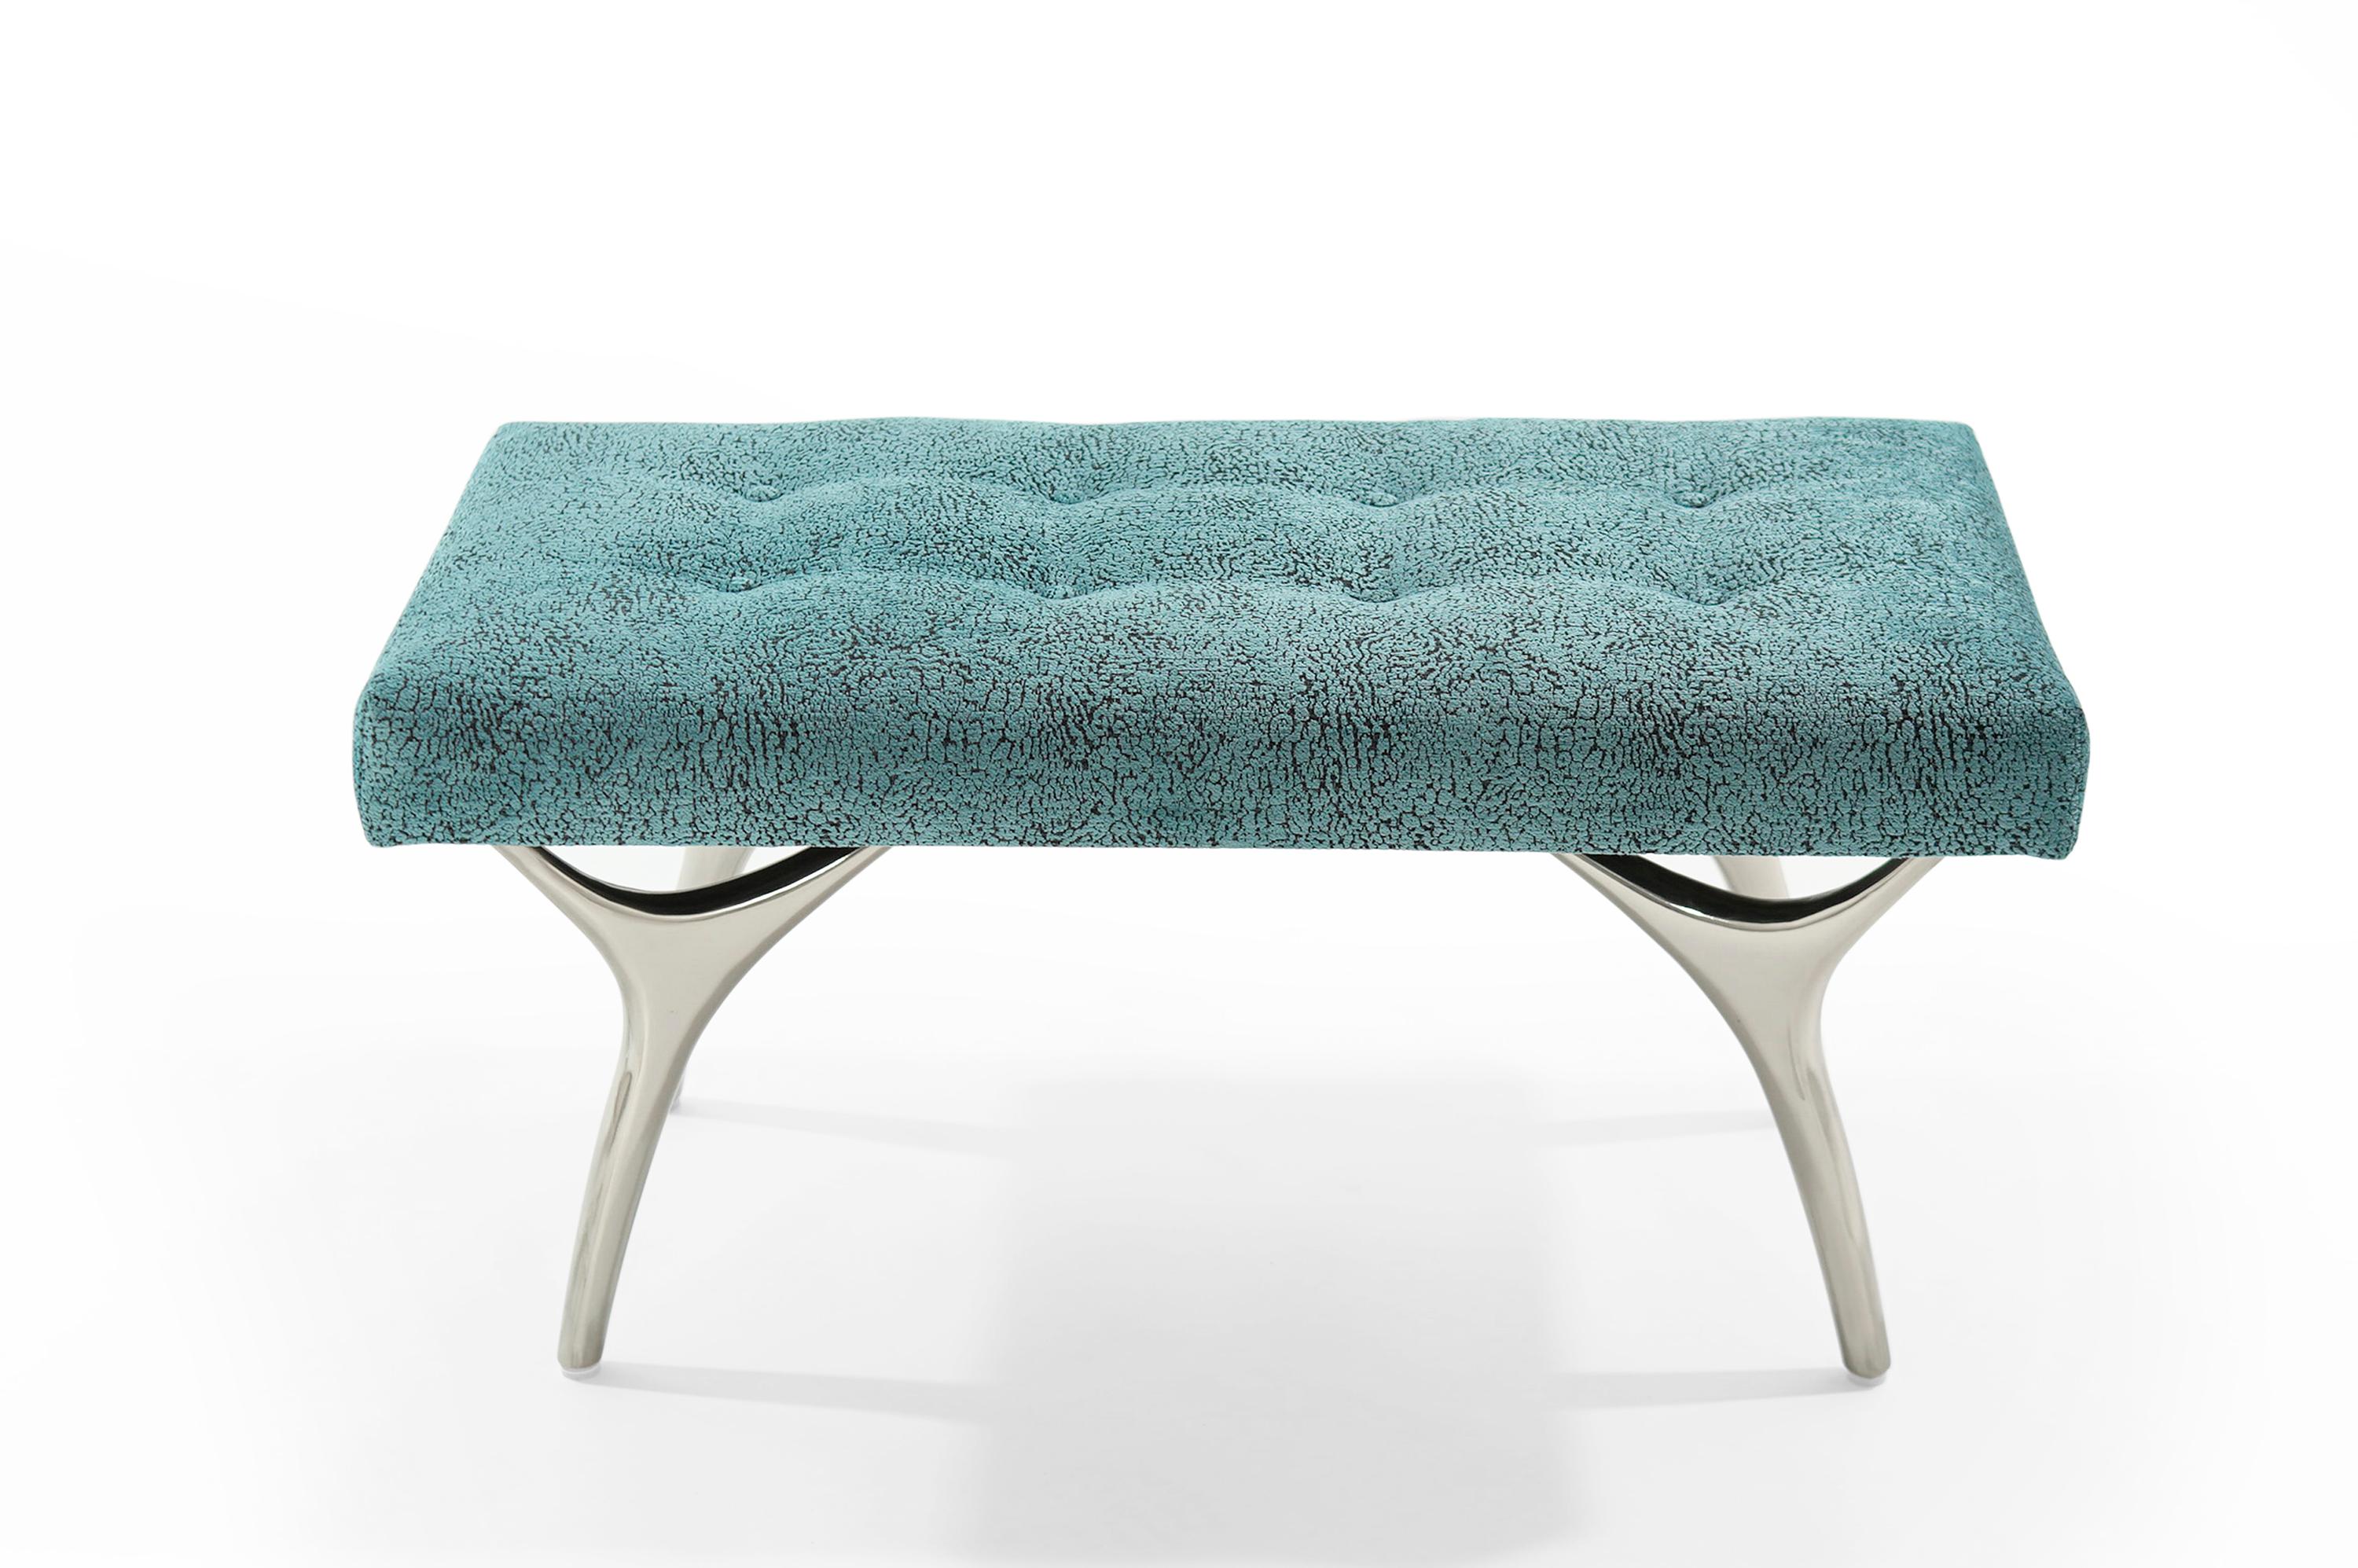 The Crescent Bench by Carlos Solano for Stamford Modern a remarkable blend of elegance, stability, and artistic craftsmanship. This exquisite bench is designed to enhance any space with its captivating presence and exceptional functionality.
 

The